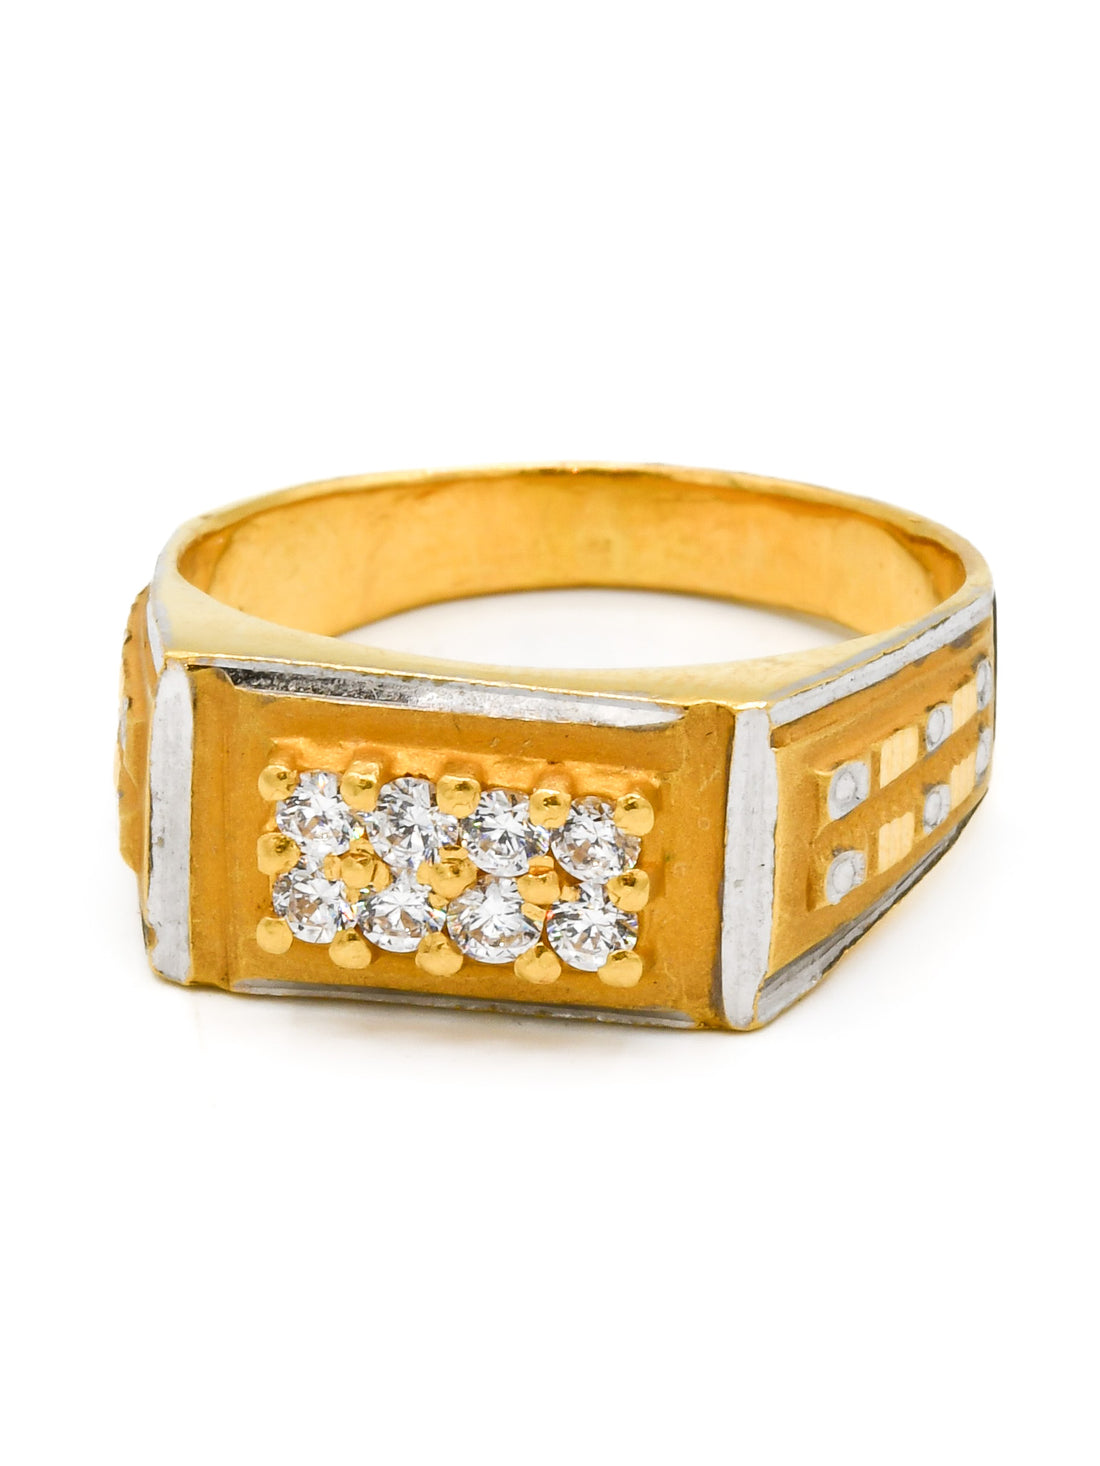 22ct Gold Two Tone CZ Mens Ring - Roop Darshan